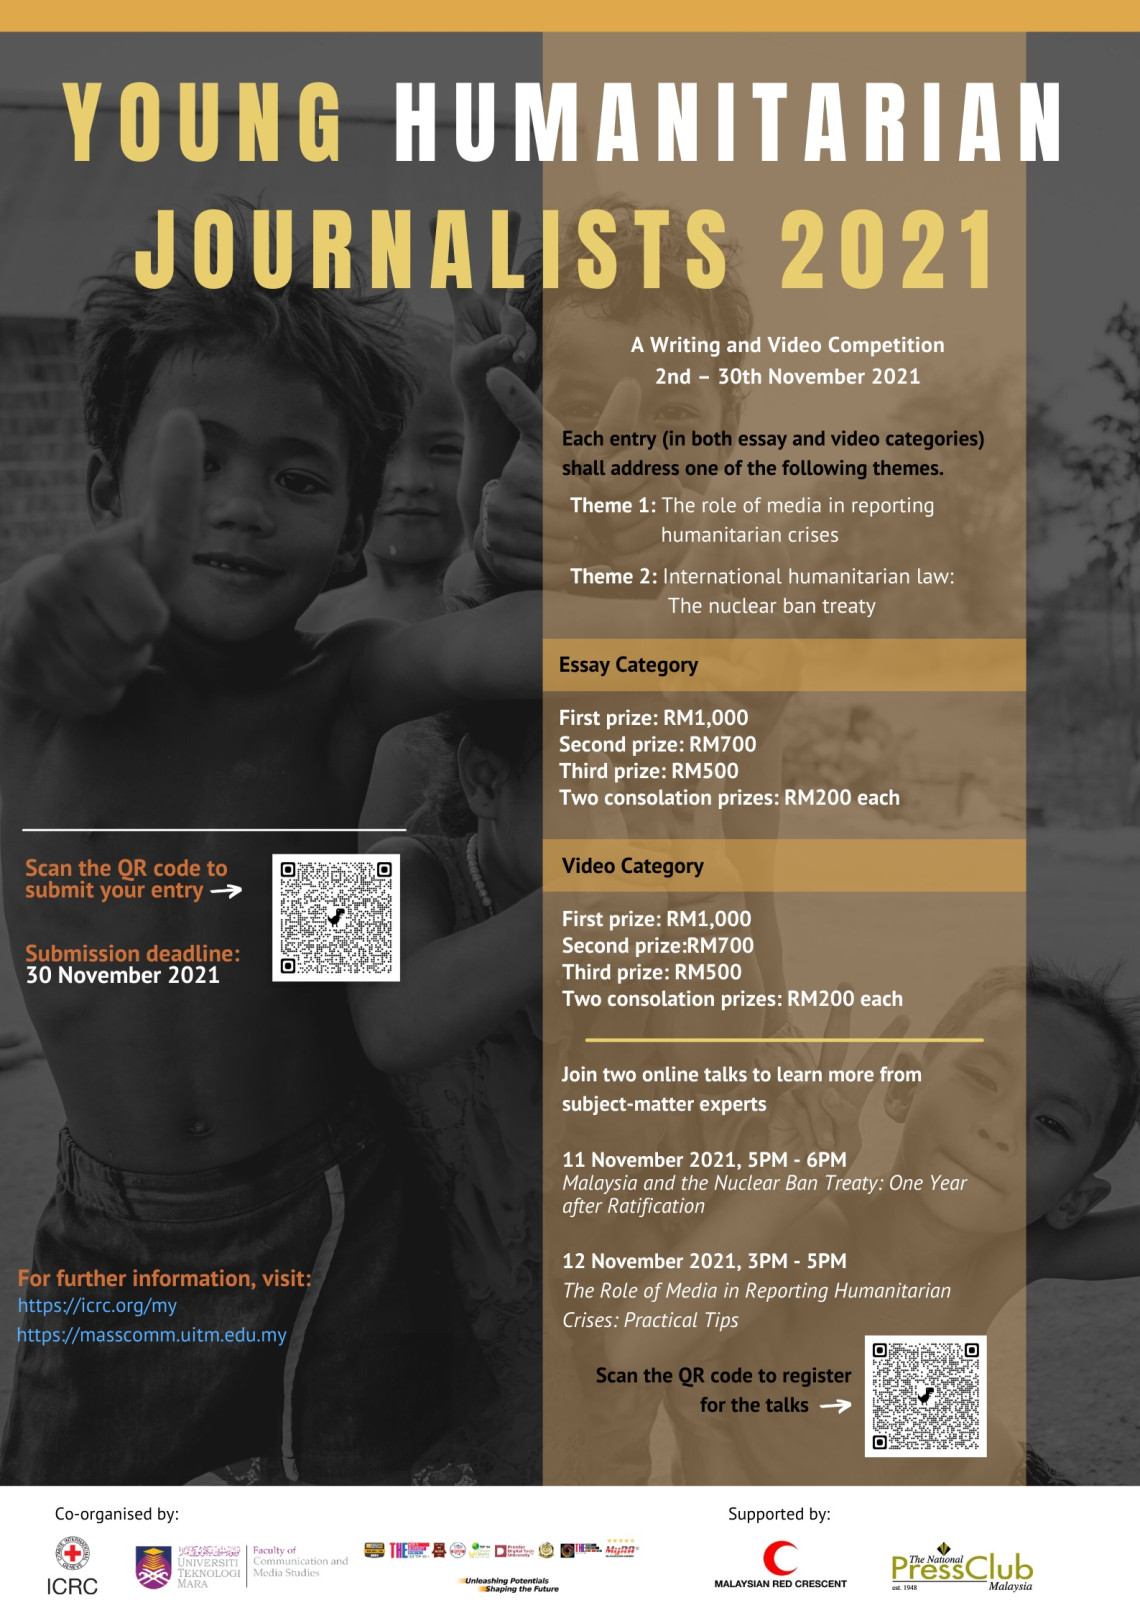 Young Humanitarian Journalists Competition 2021 gets rolling